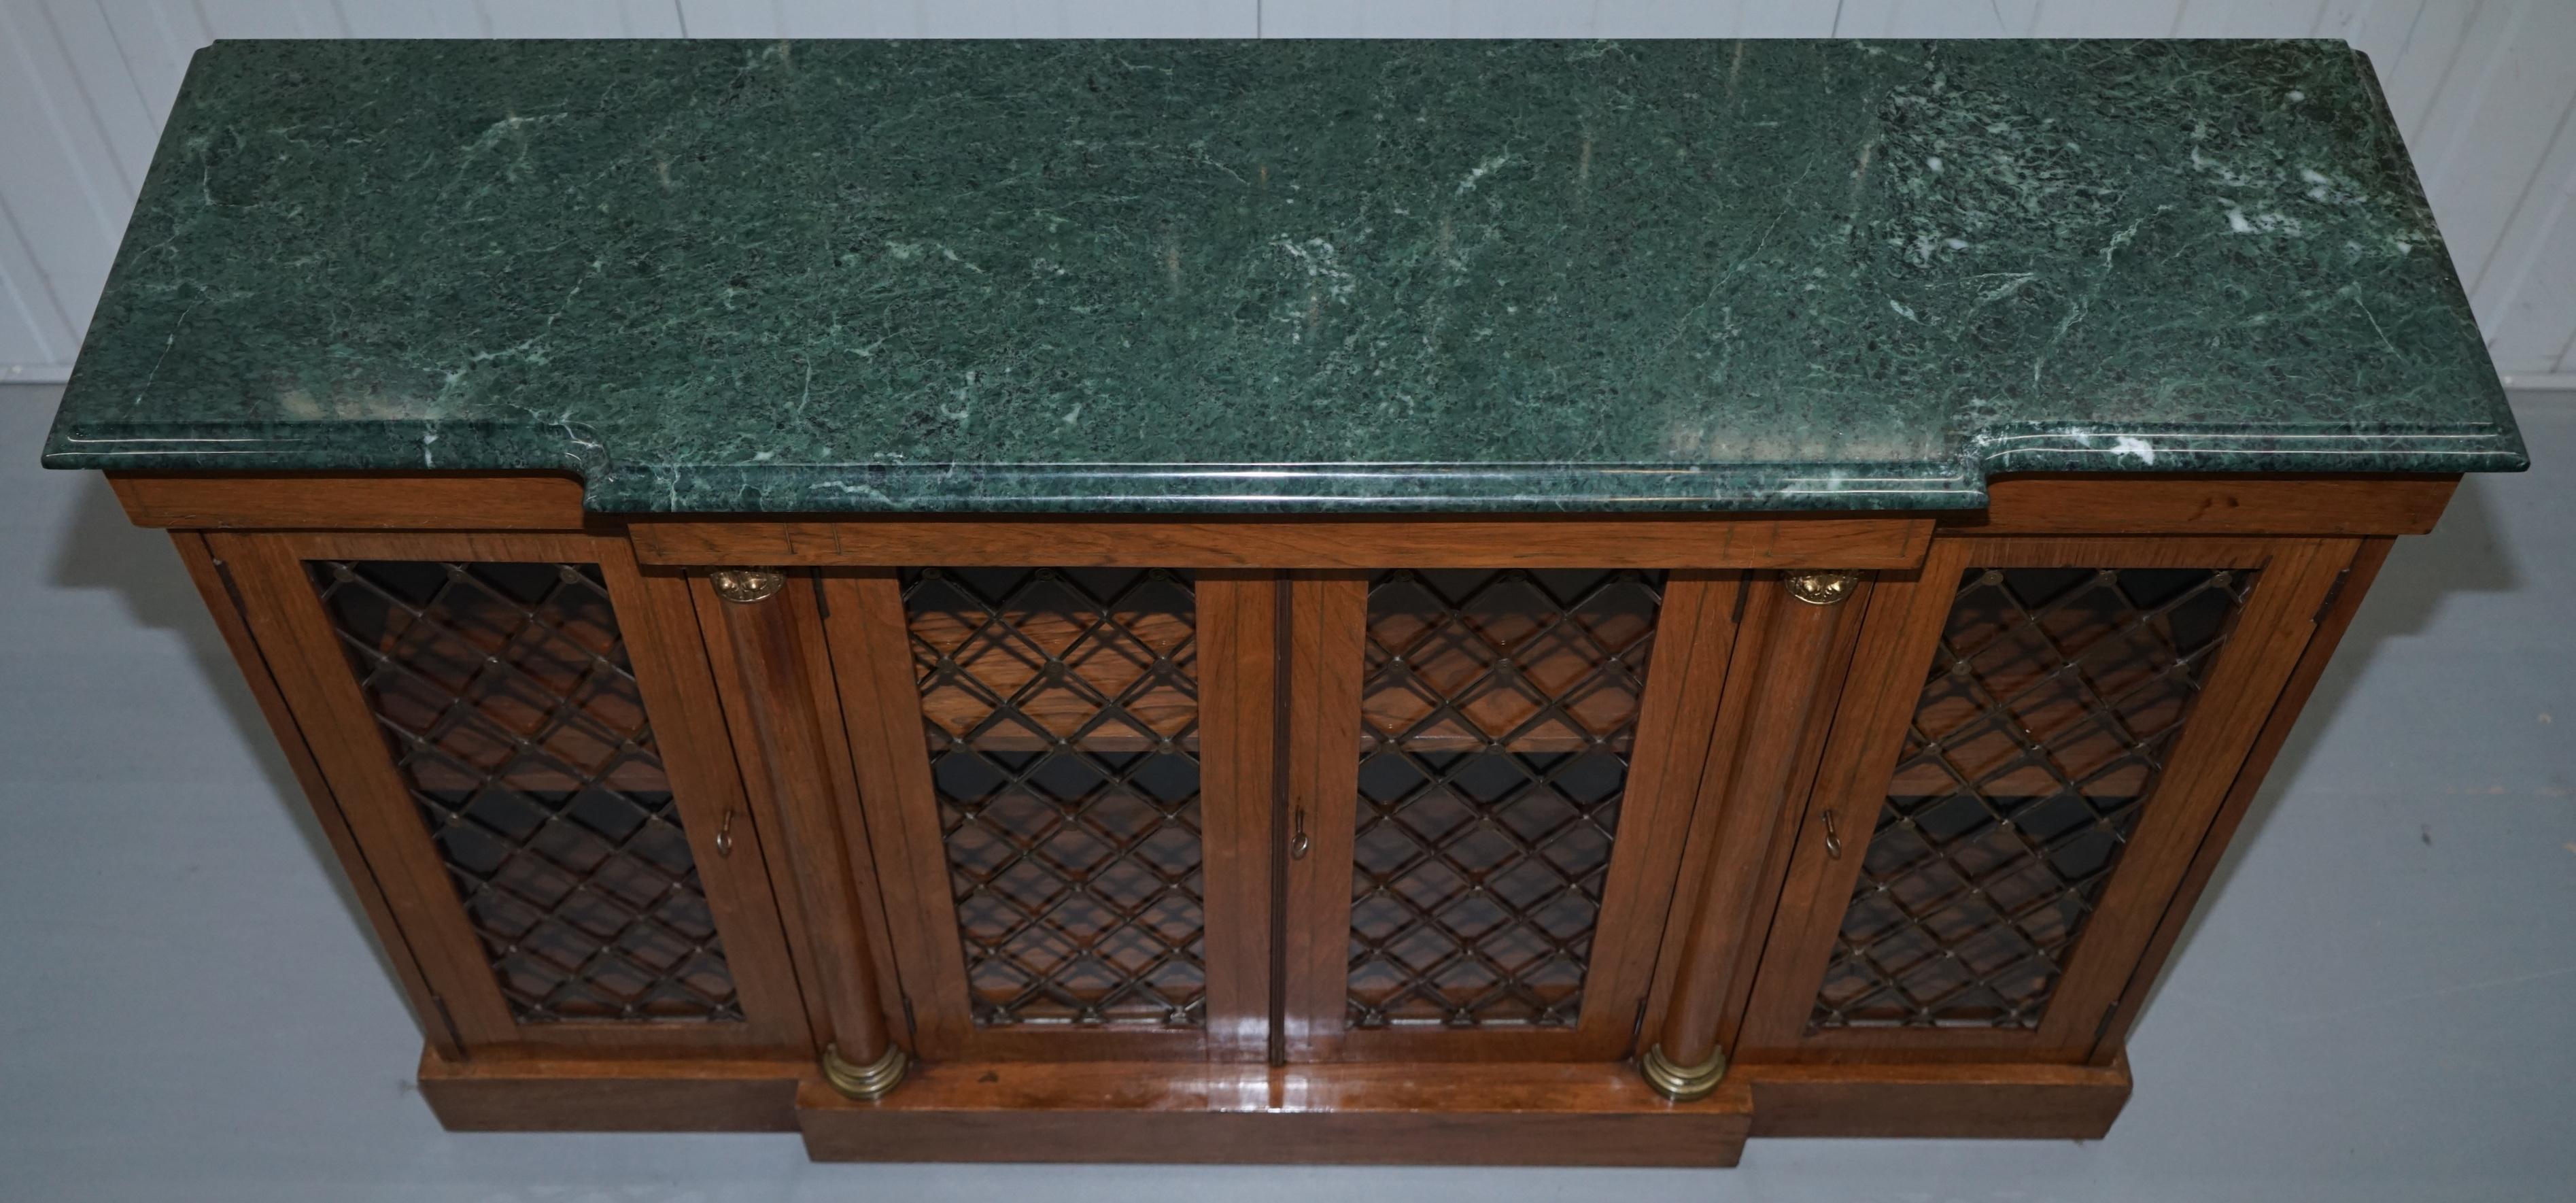 Hand-Carved Regency Redwood Jade Green Marble Top Library Bookcase Cabinet Brass Inlaid